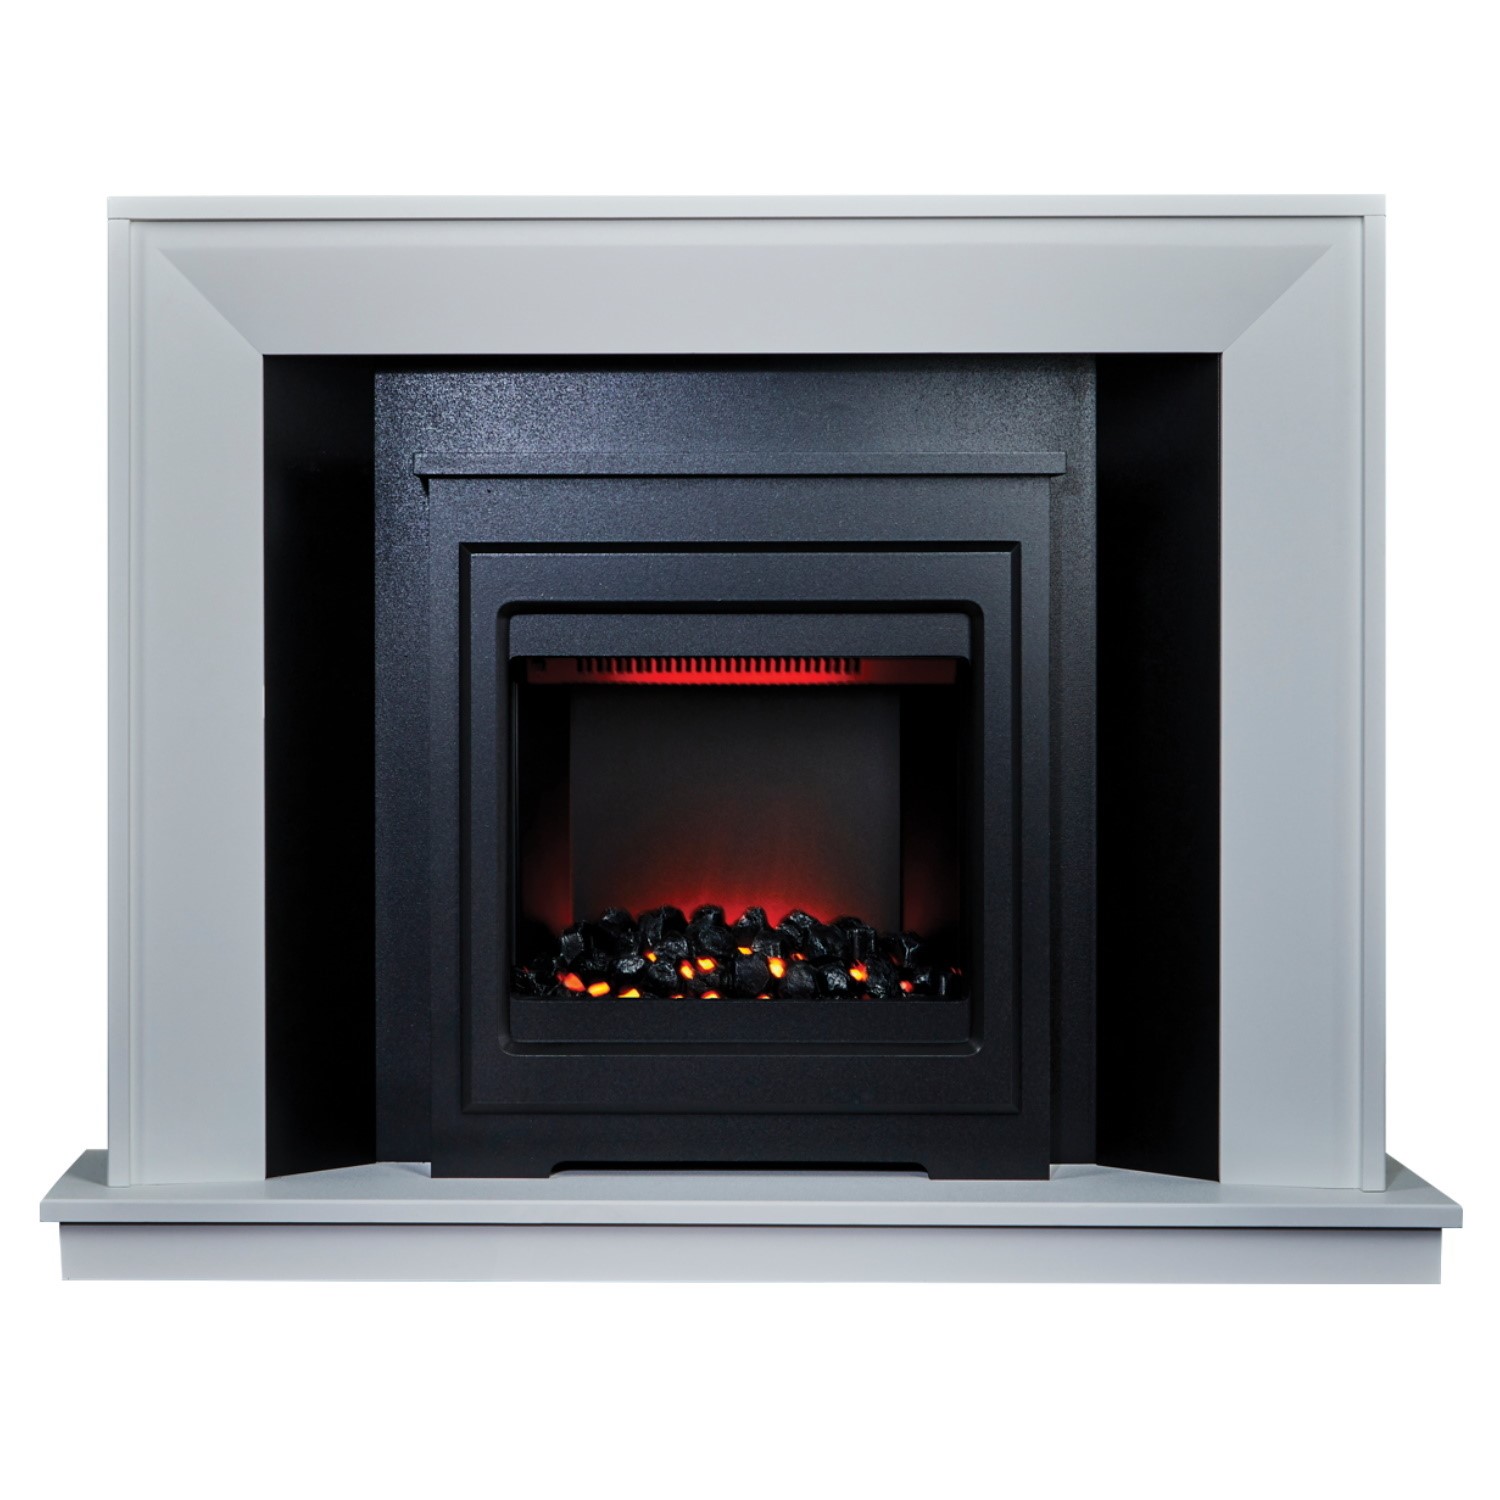 Read more about Suncrest black & white freestanding electric fireplace suite mayford